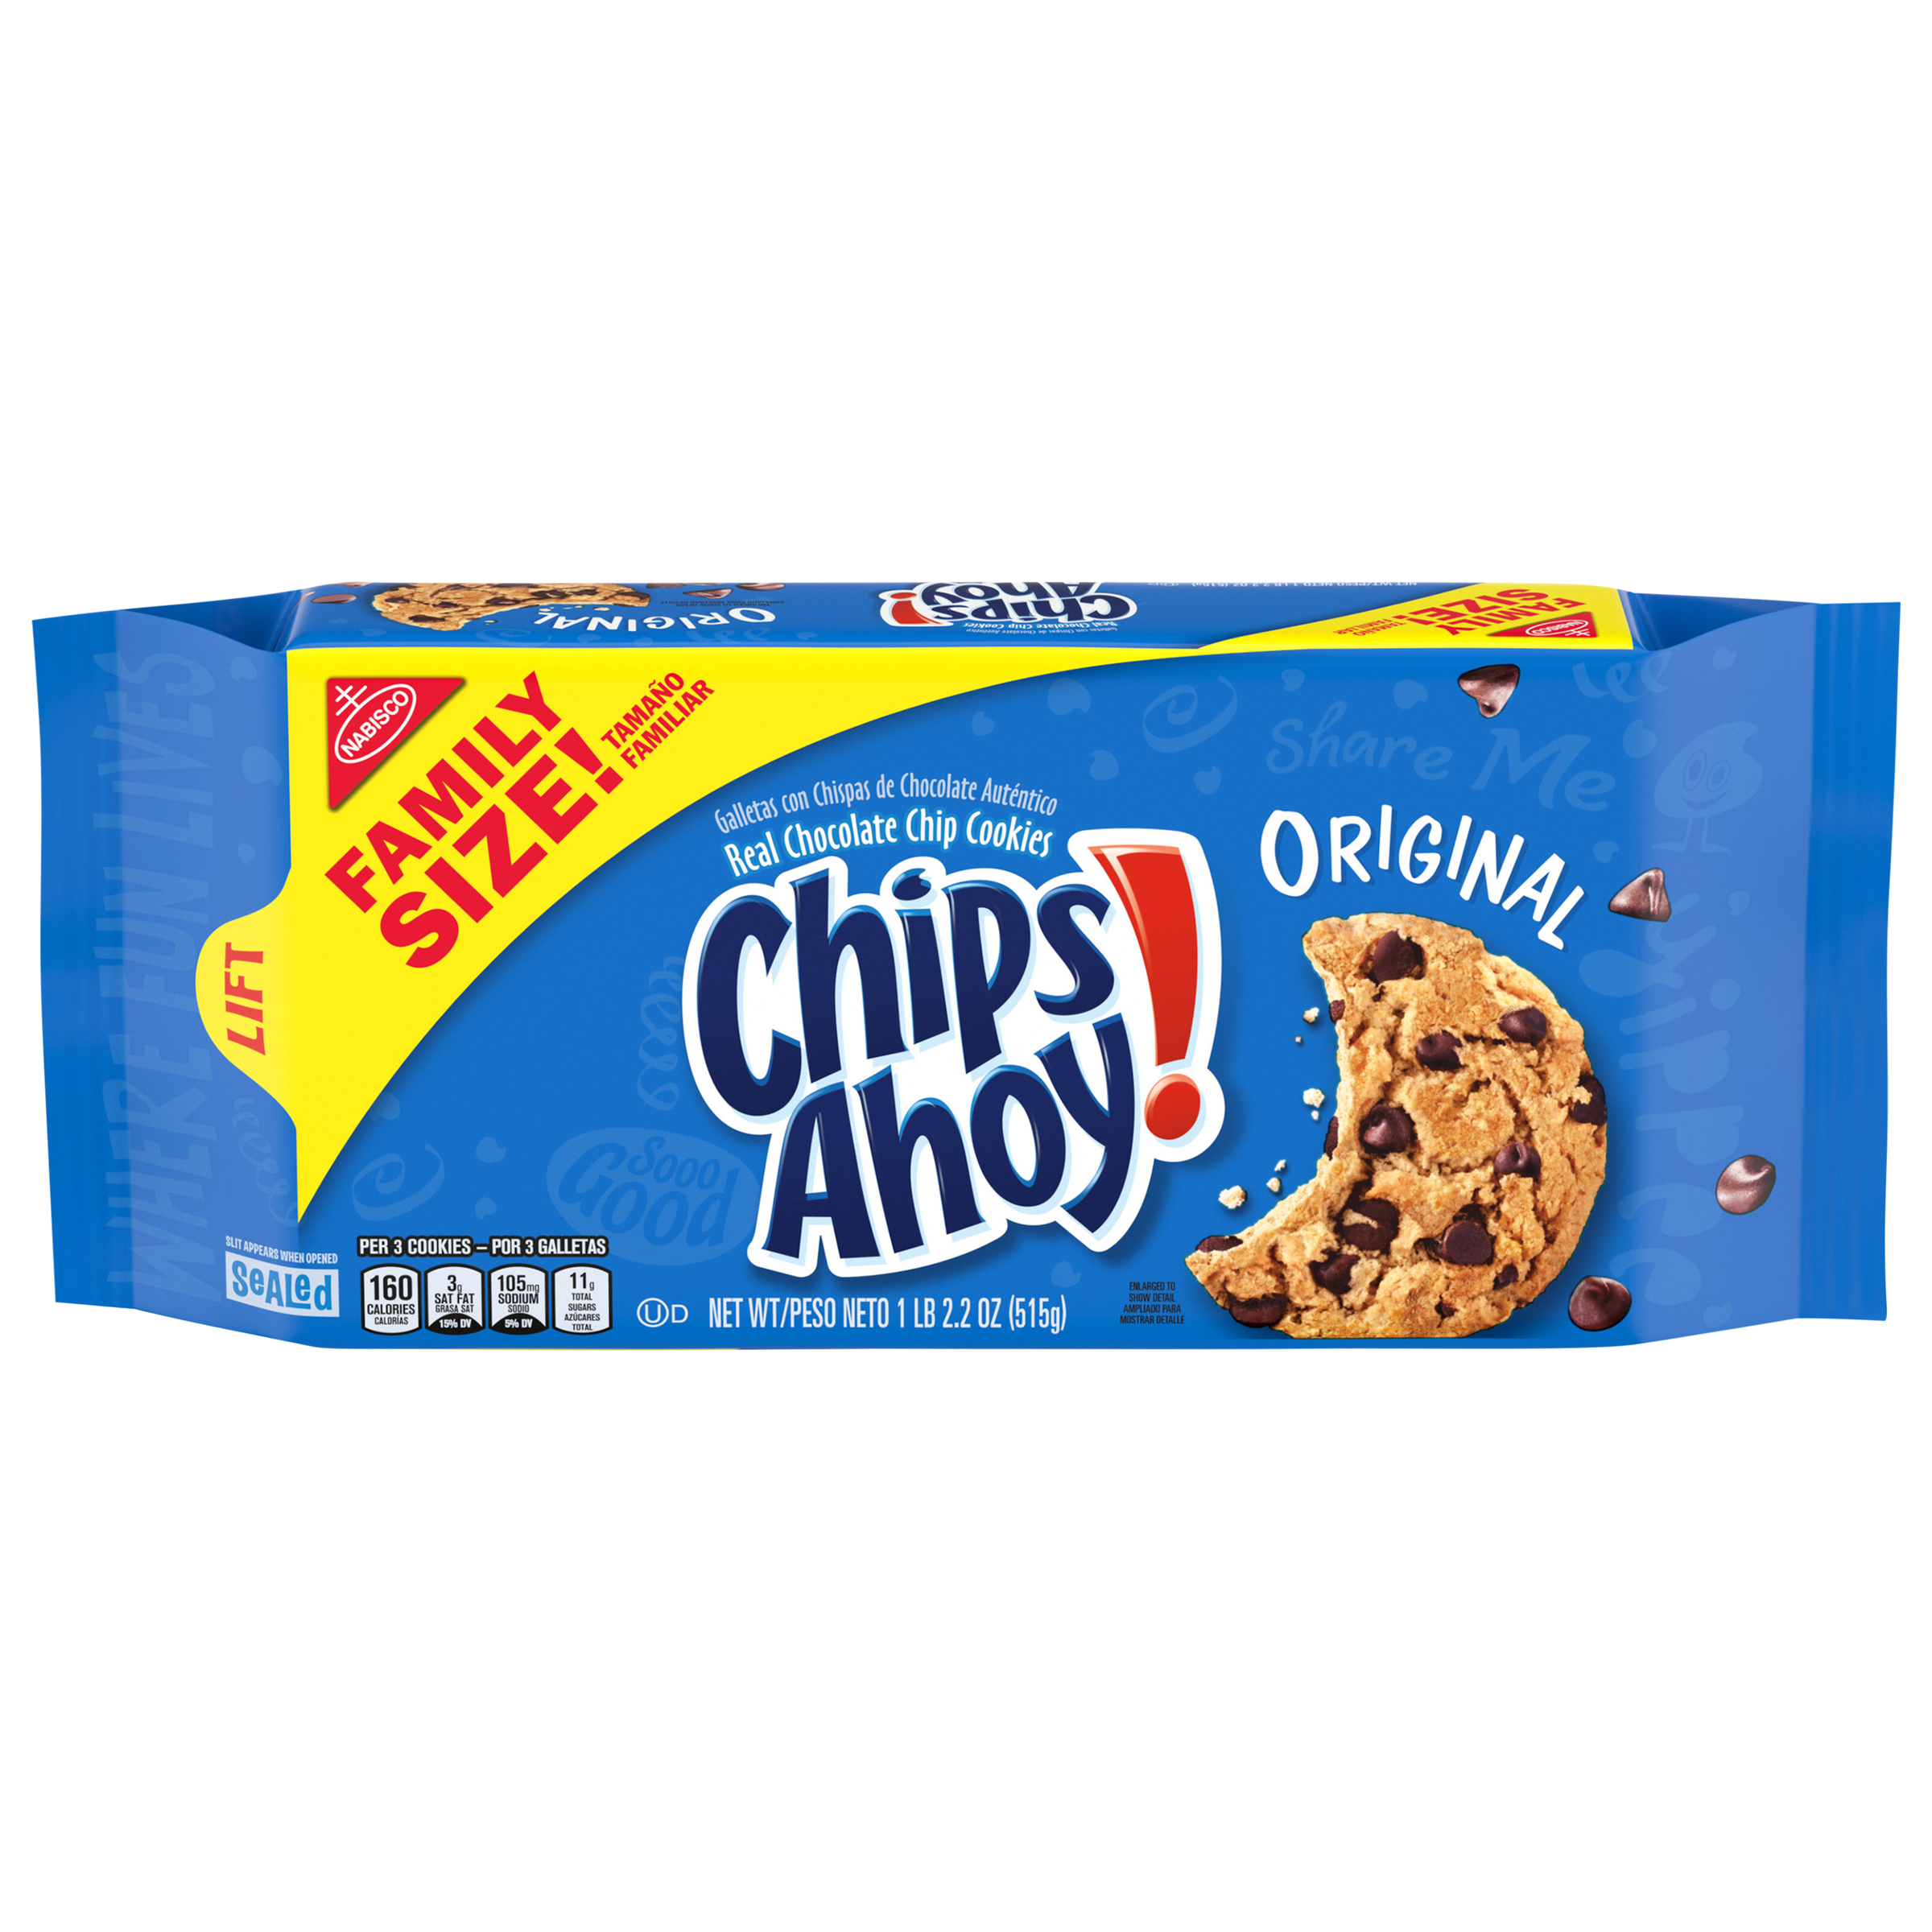 CHIPS AHOY! Original Chocolate Chip Cookies, Family Size, 18.2 oz-0